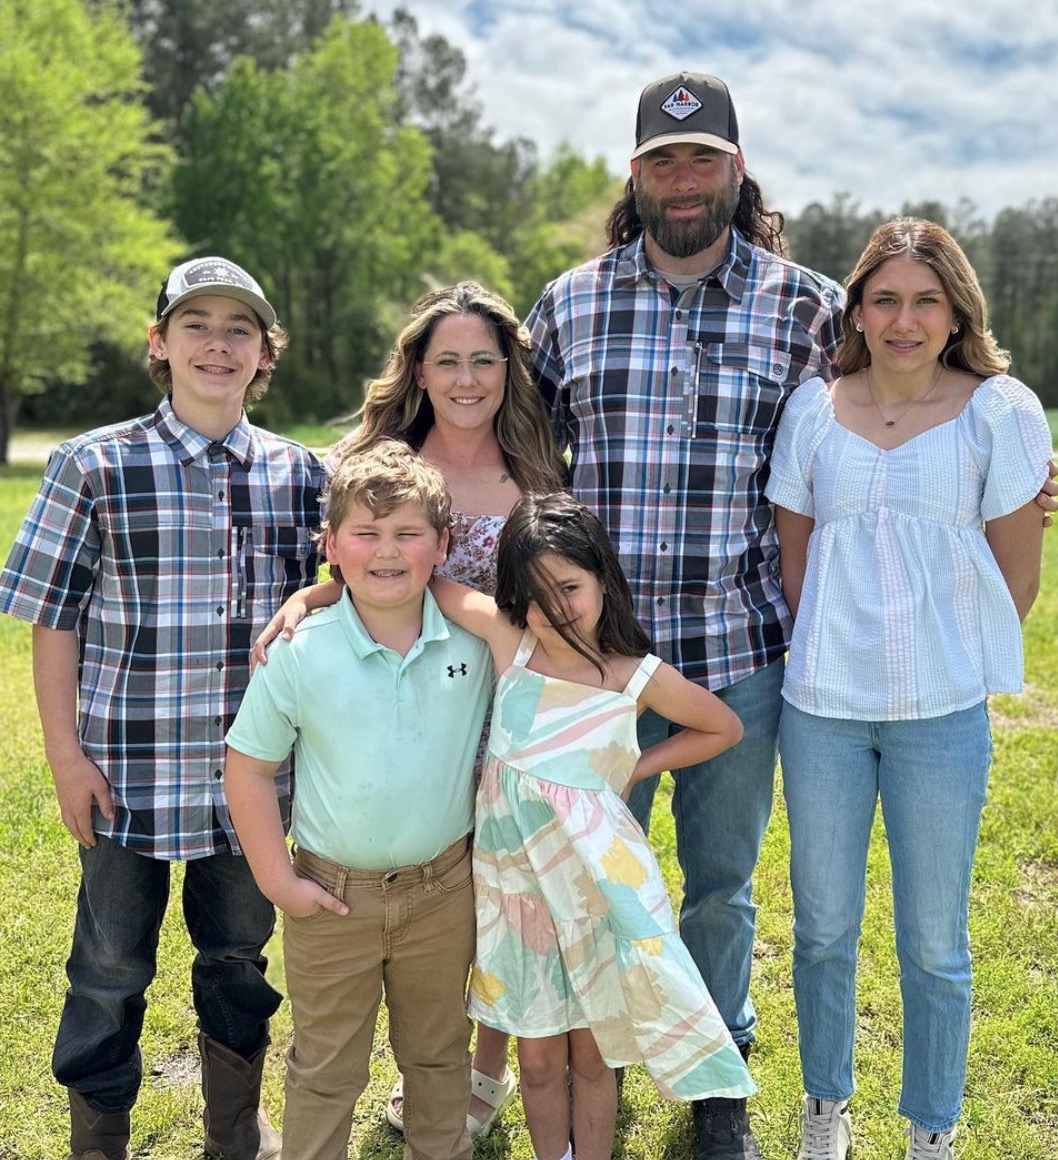 Jenelle Evans' Husband Charged With Child Abuse...Jenelle Speaks Out | Jenelle Evans' husband, David Eason, has been charged with misdemeanor child abuse after weeks of speculation.